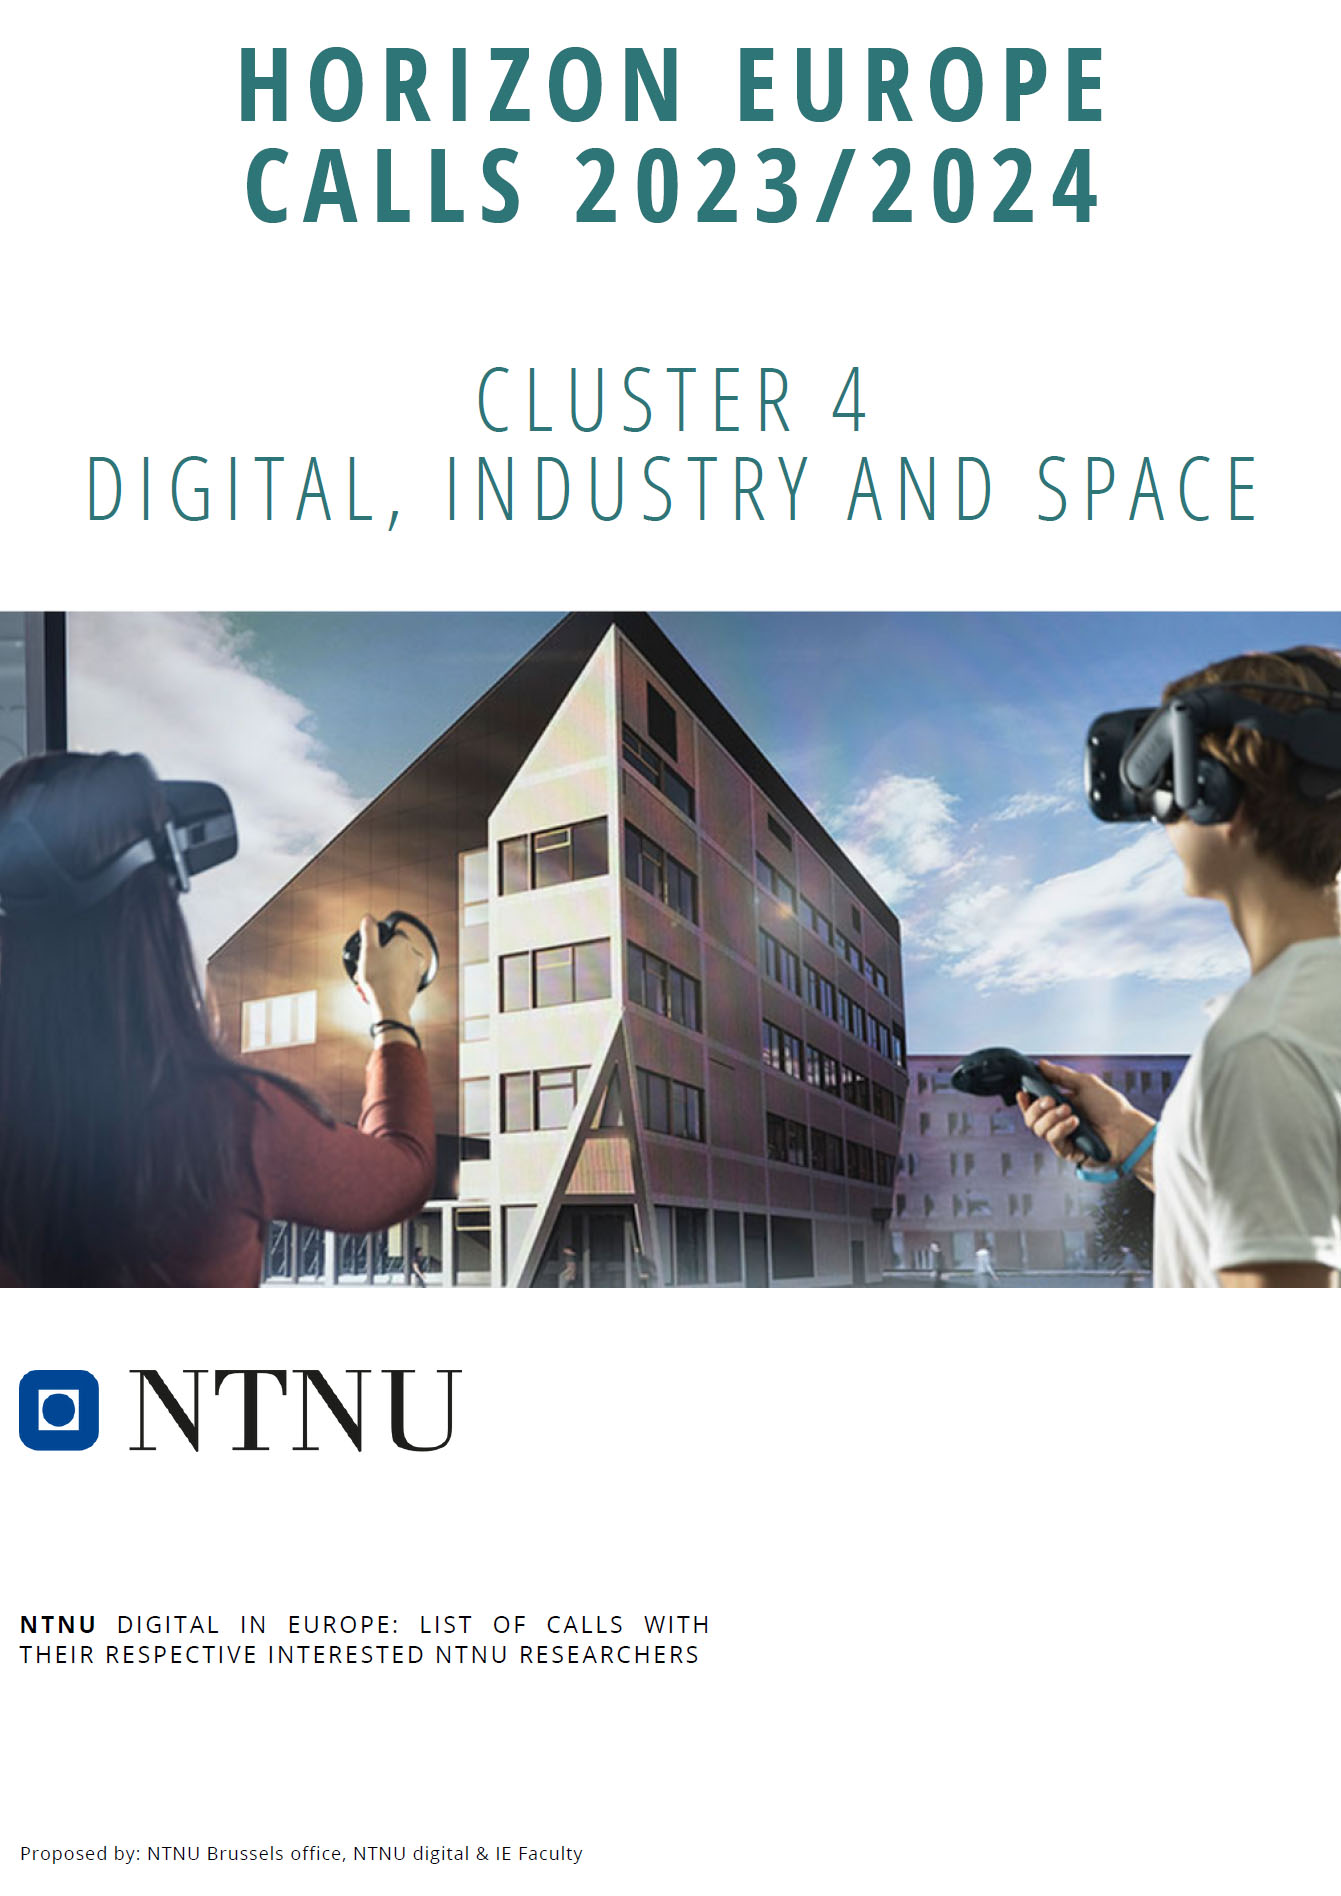 Cover - Cluster 4 Digital, Industry and Space – Horizon Europe brochure, October 2023